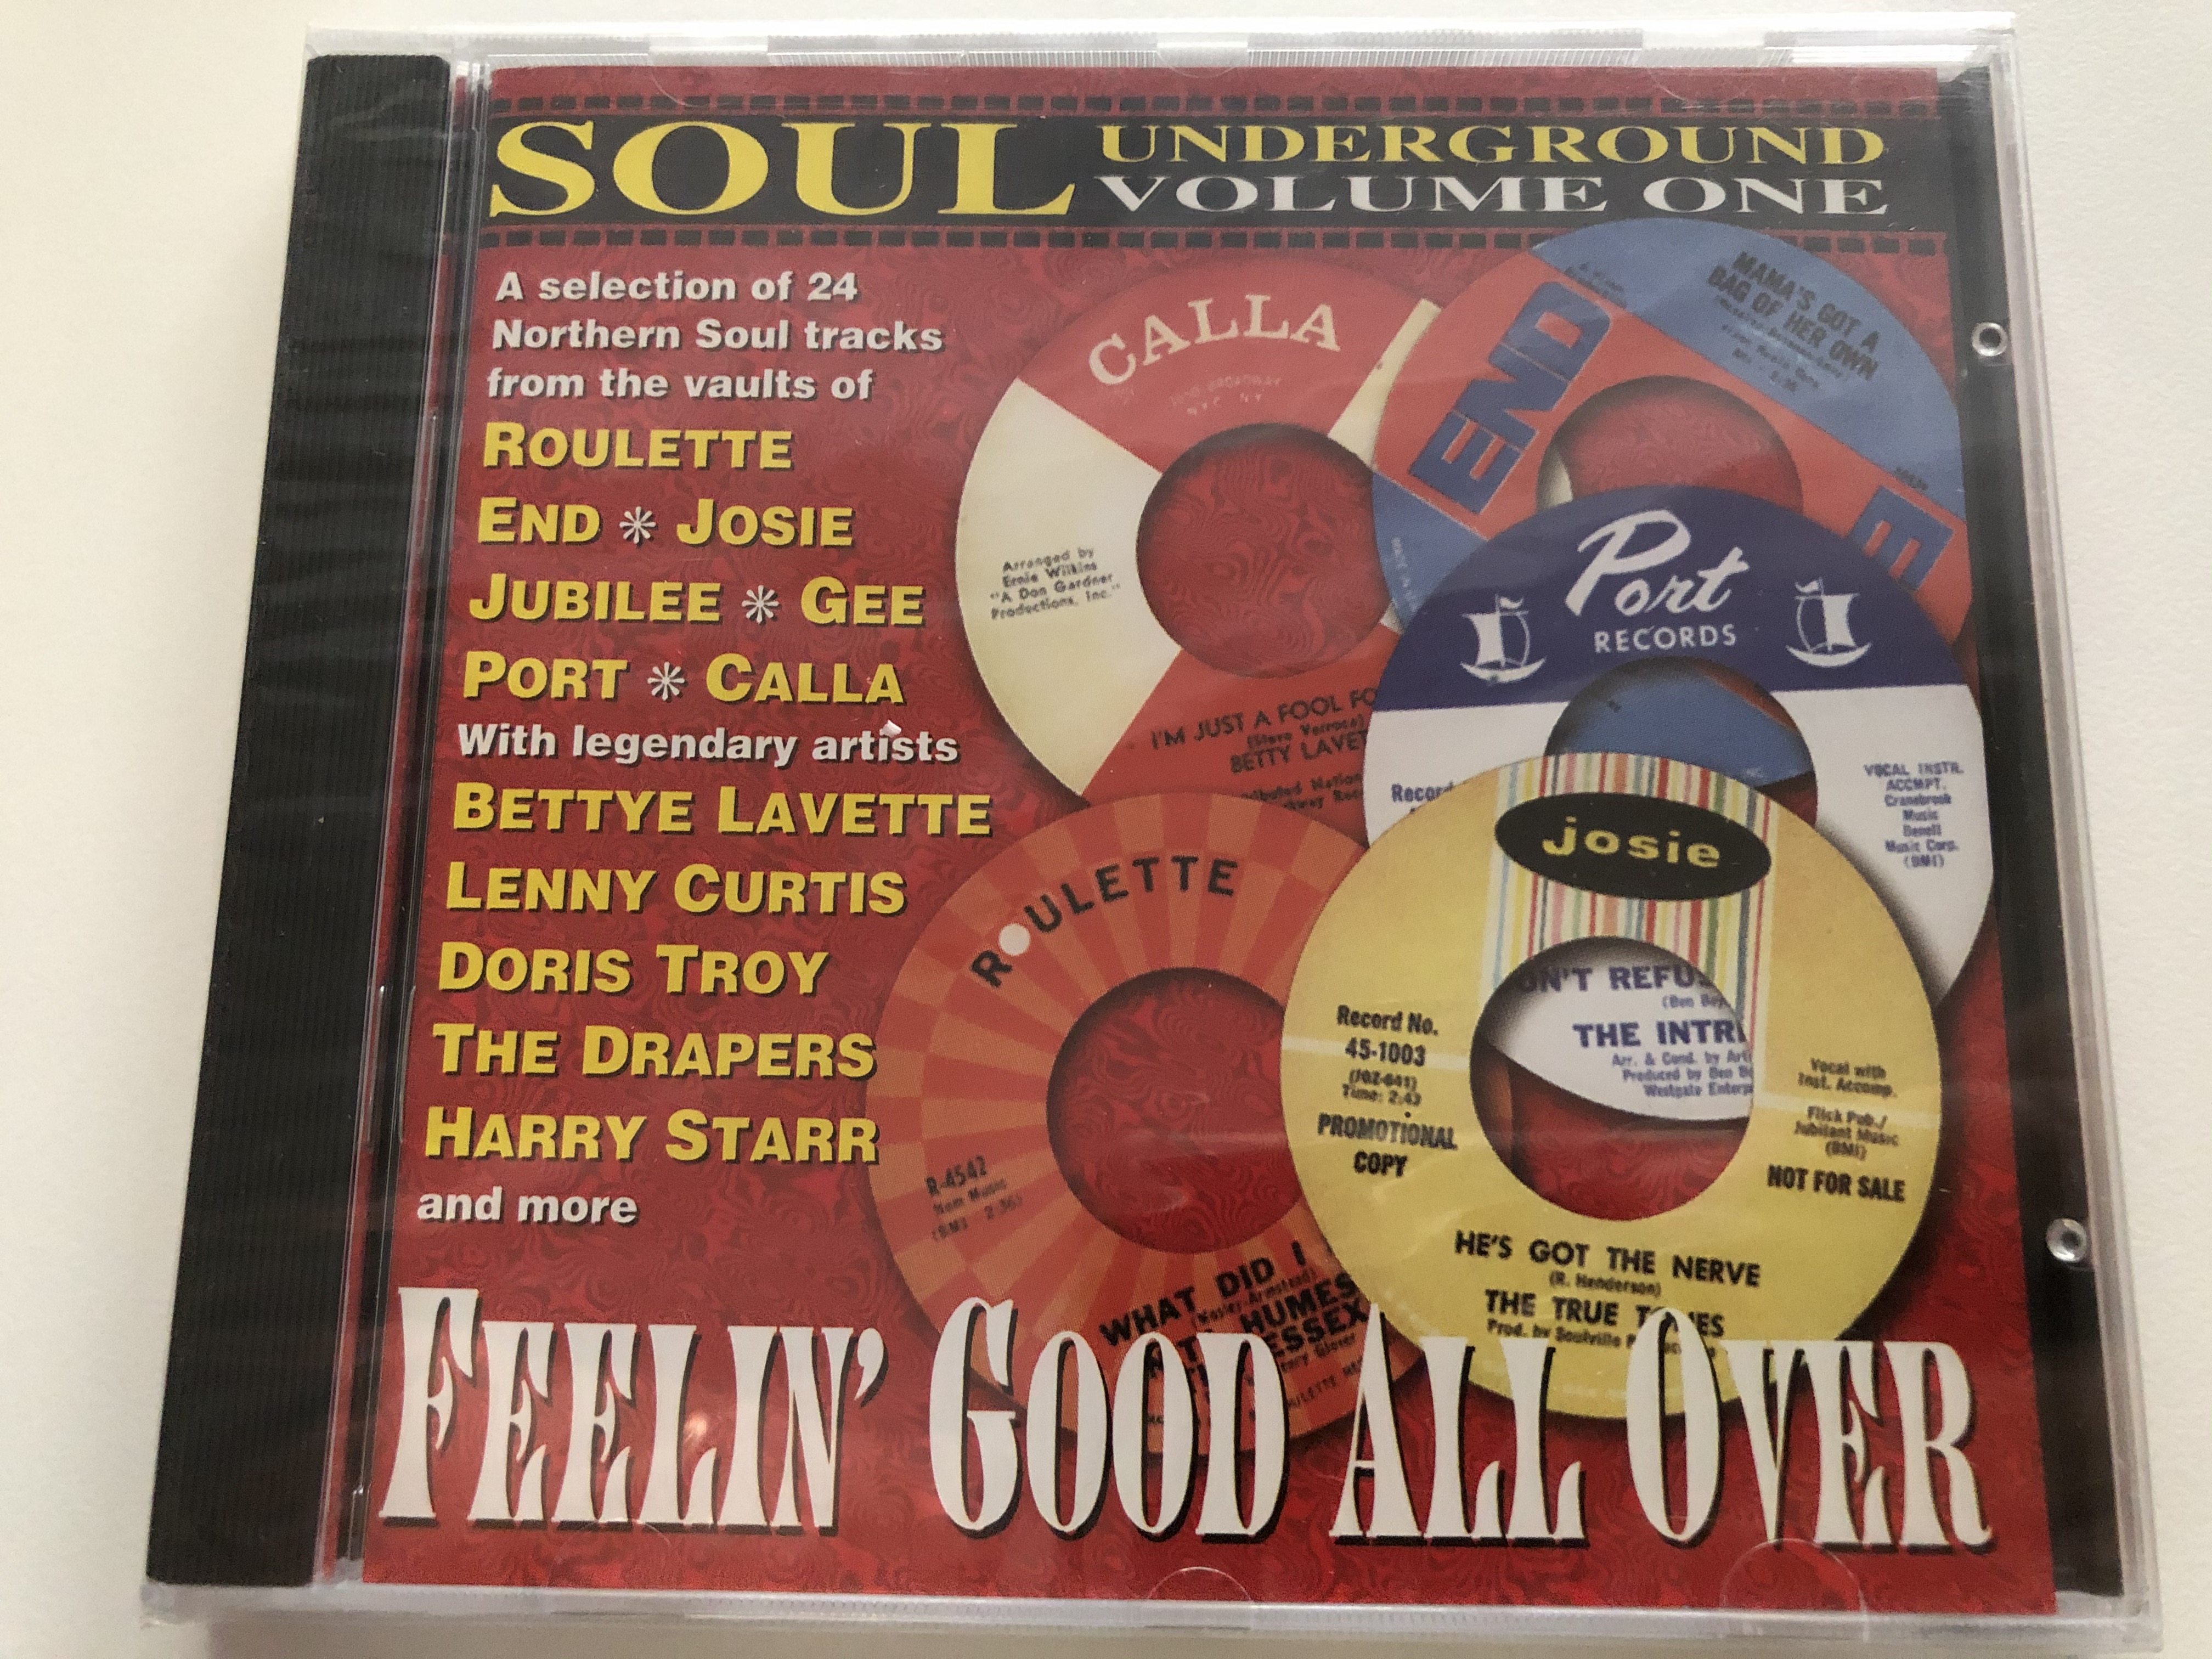 soul-underground-volume-one-feelin-good-all-over-a-selection-of-24-northern-soul-tracks-from-the-vaults-of-roulette-end-josie-jubilee-gee-port-calla-with-legendary-artists-bettye-lave-1-.jpg